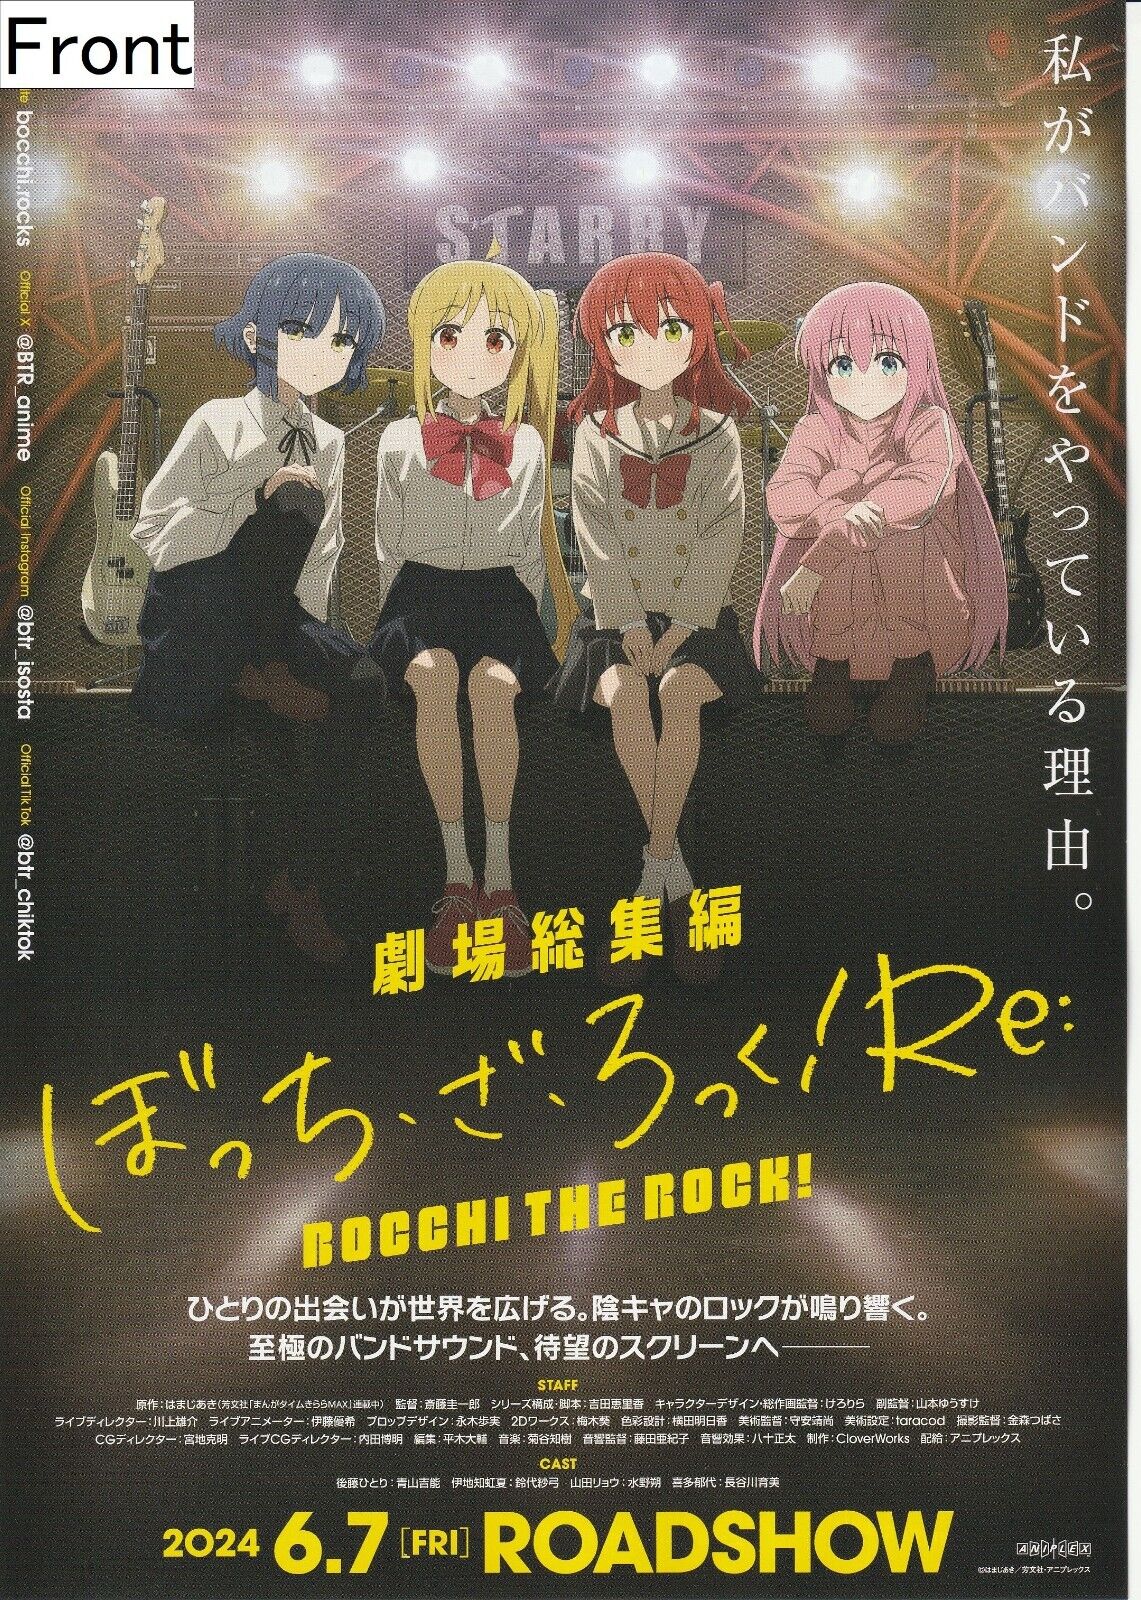 Bocchi the Rock: Re Promotional Poster